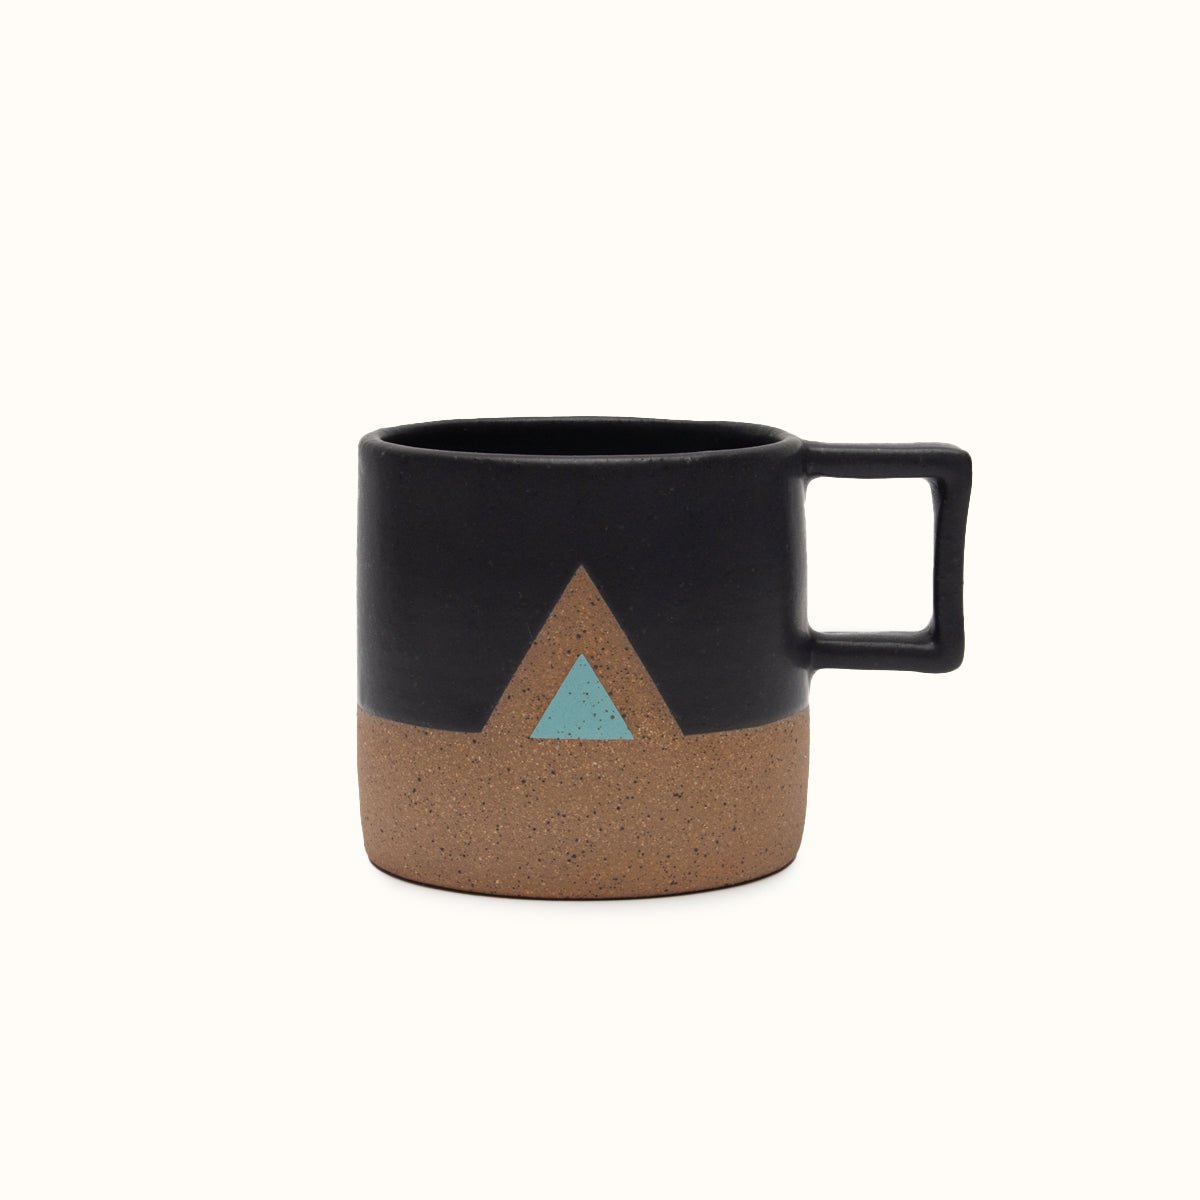 Handle Mug with black satin glaze and turquoise triangle. Made in Portland, Oregon by Wolf Ceramics.